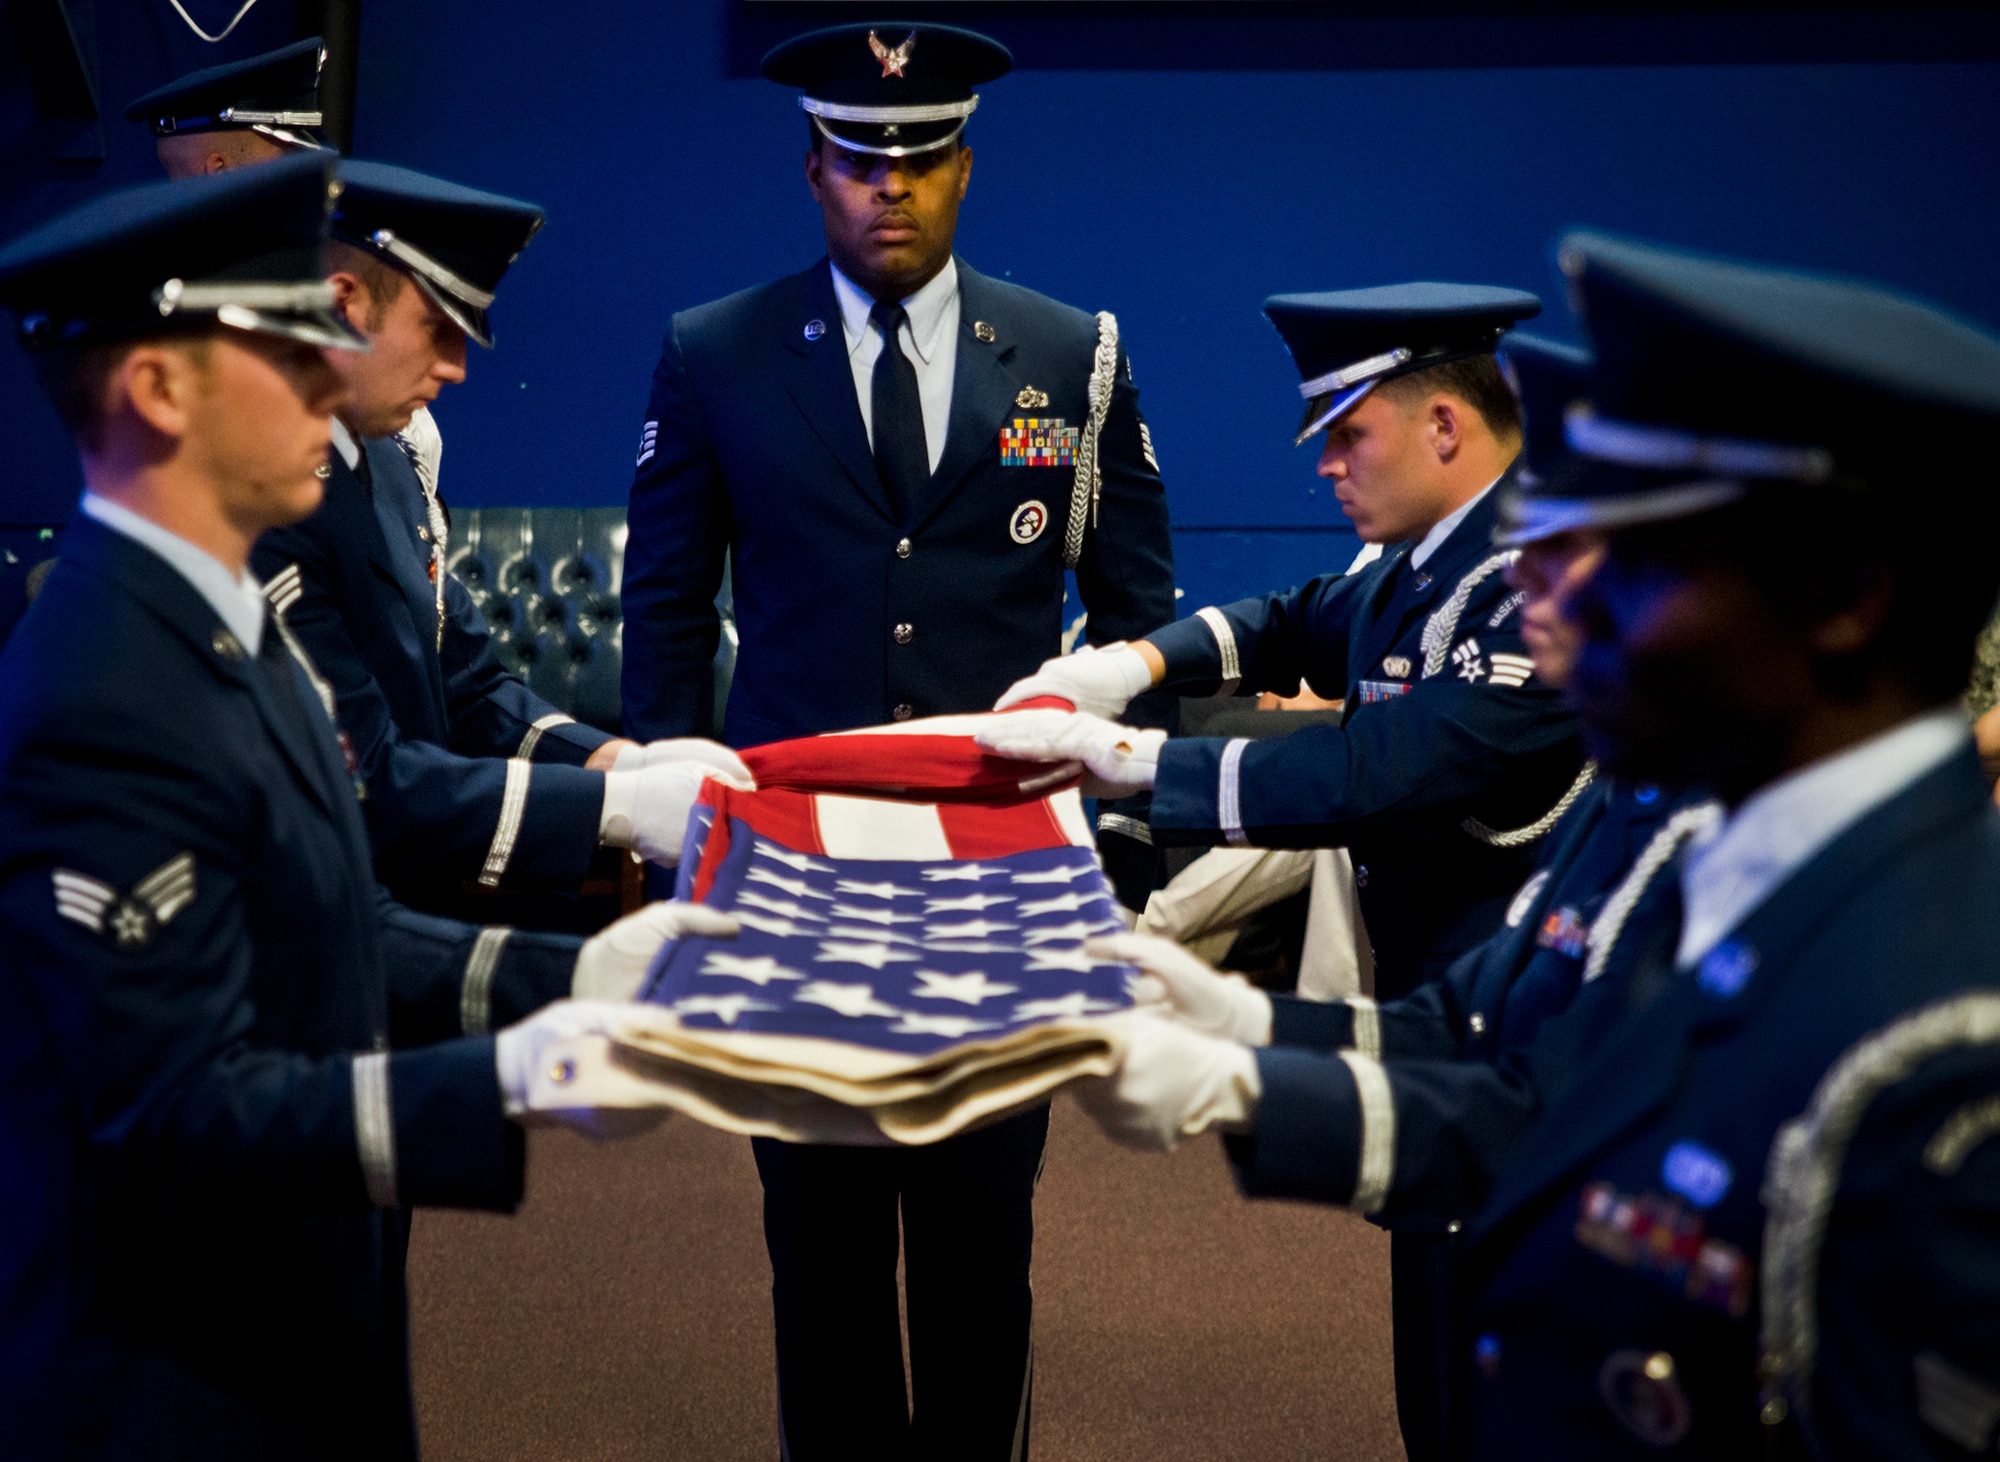 An American flag is folded by the Eglin Honor Guard to be presented to Senior Airman Josh Santos’ mother, Lisa, during his memorial Jan. 13 at Duke Field, Fla.  Santos passed away Nov. 26 from colon cancer.  He was a radio operator with the 711th Special Operations Squadron.  During the memorial, it was announced the Duke Field gym would be renamed Santos Strength in his honor.  (U.S. Air Force photo/Tech. Sgt. Samuel King Jr.)